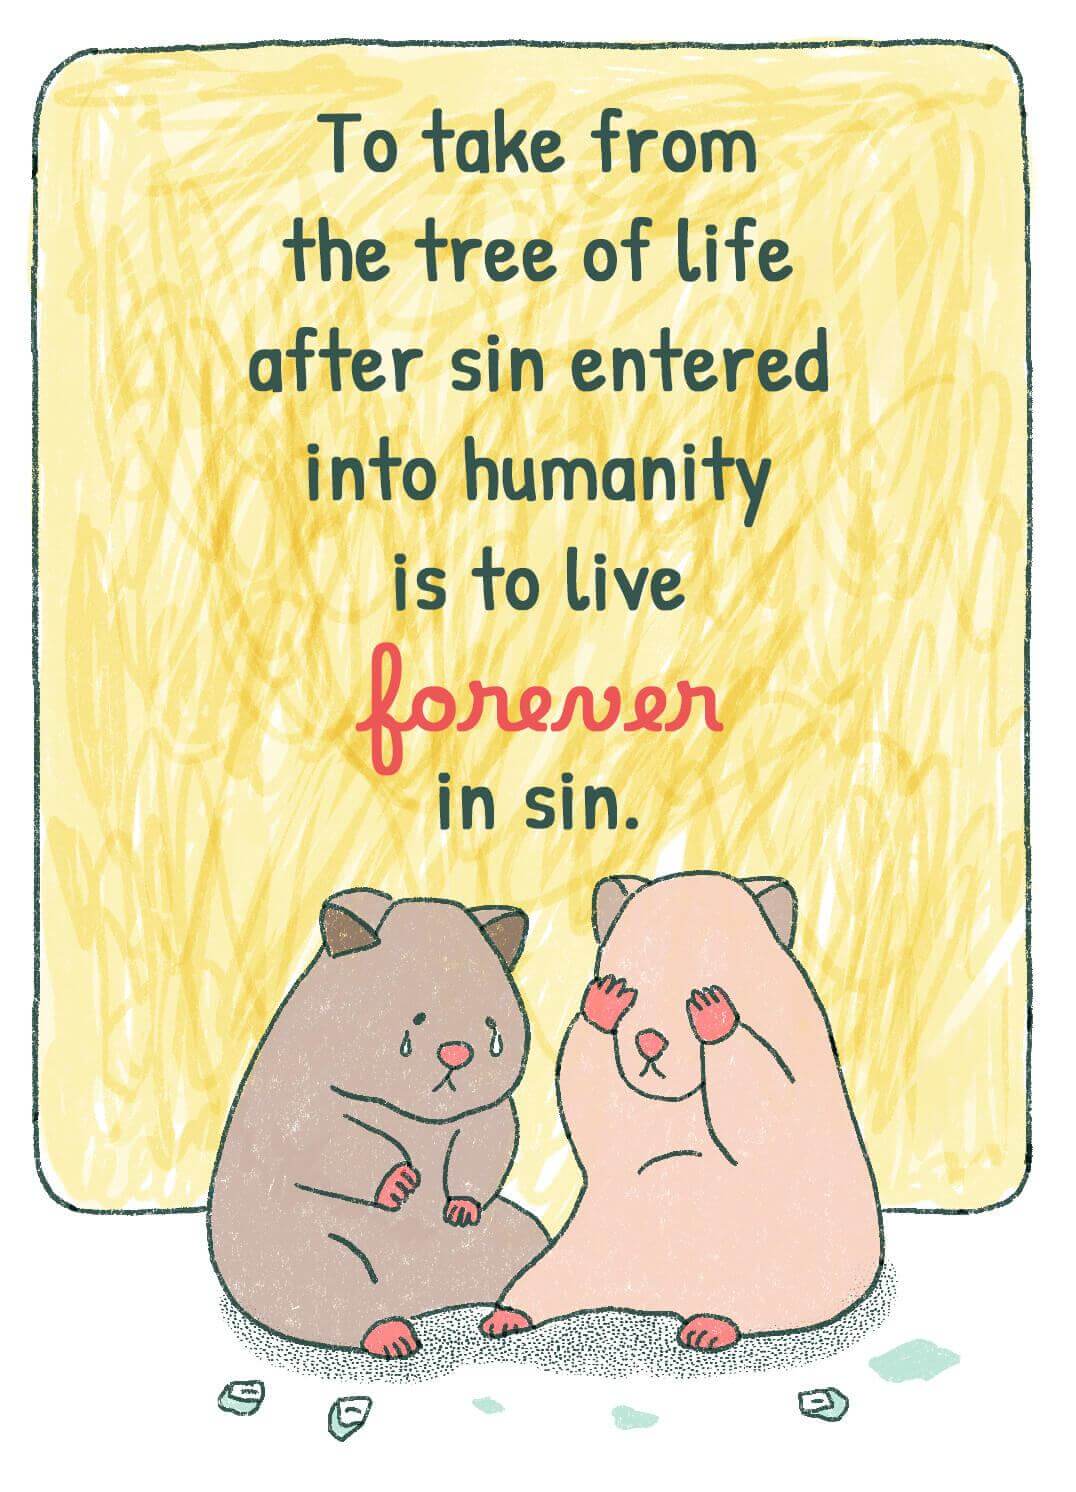 To take from the tree of life after sin entered into humanity is to live forever in sin.